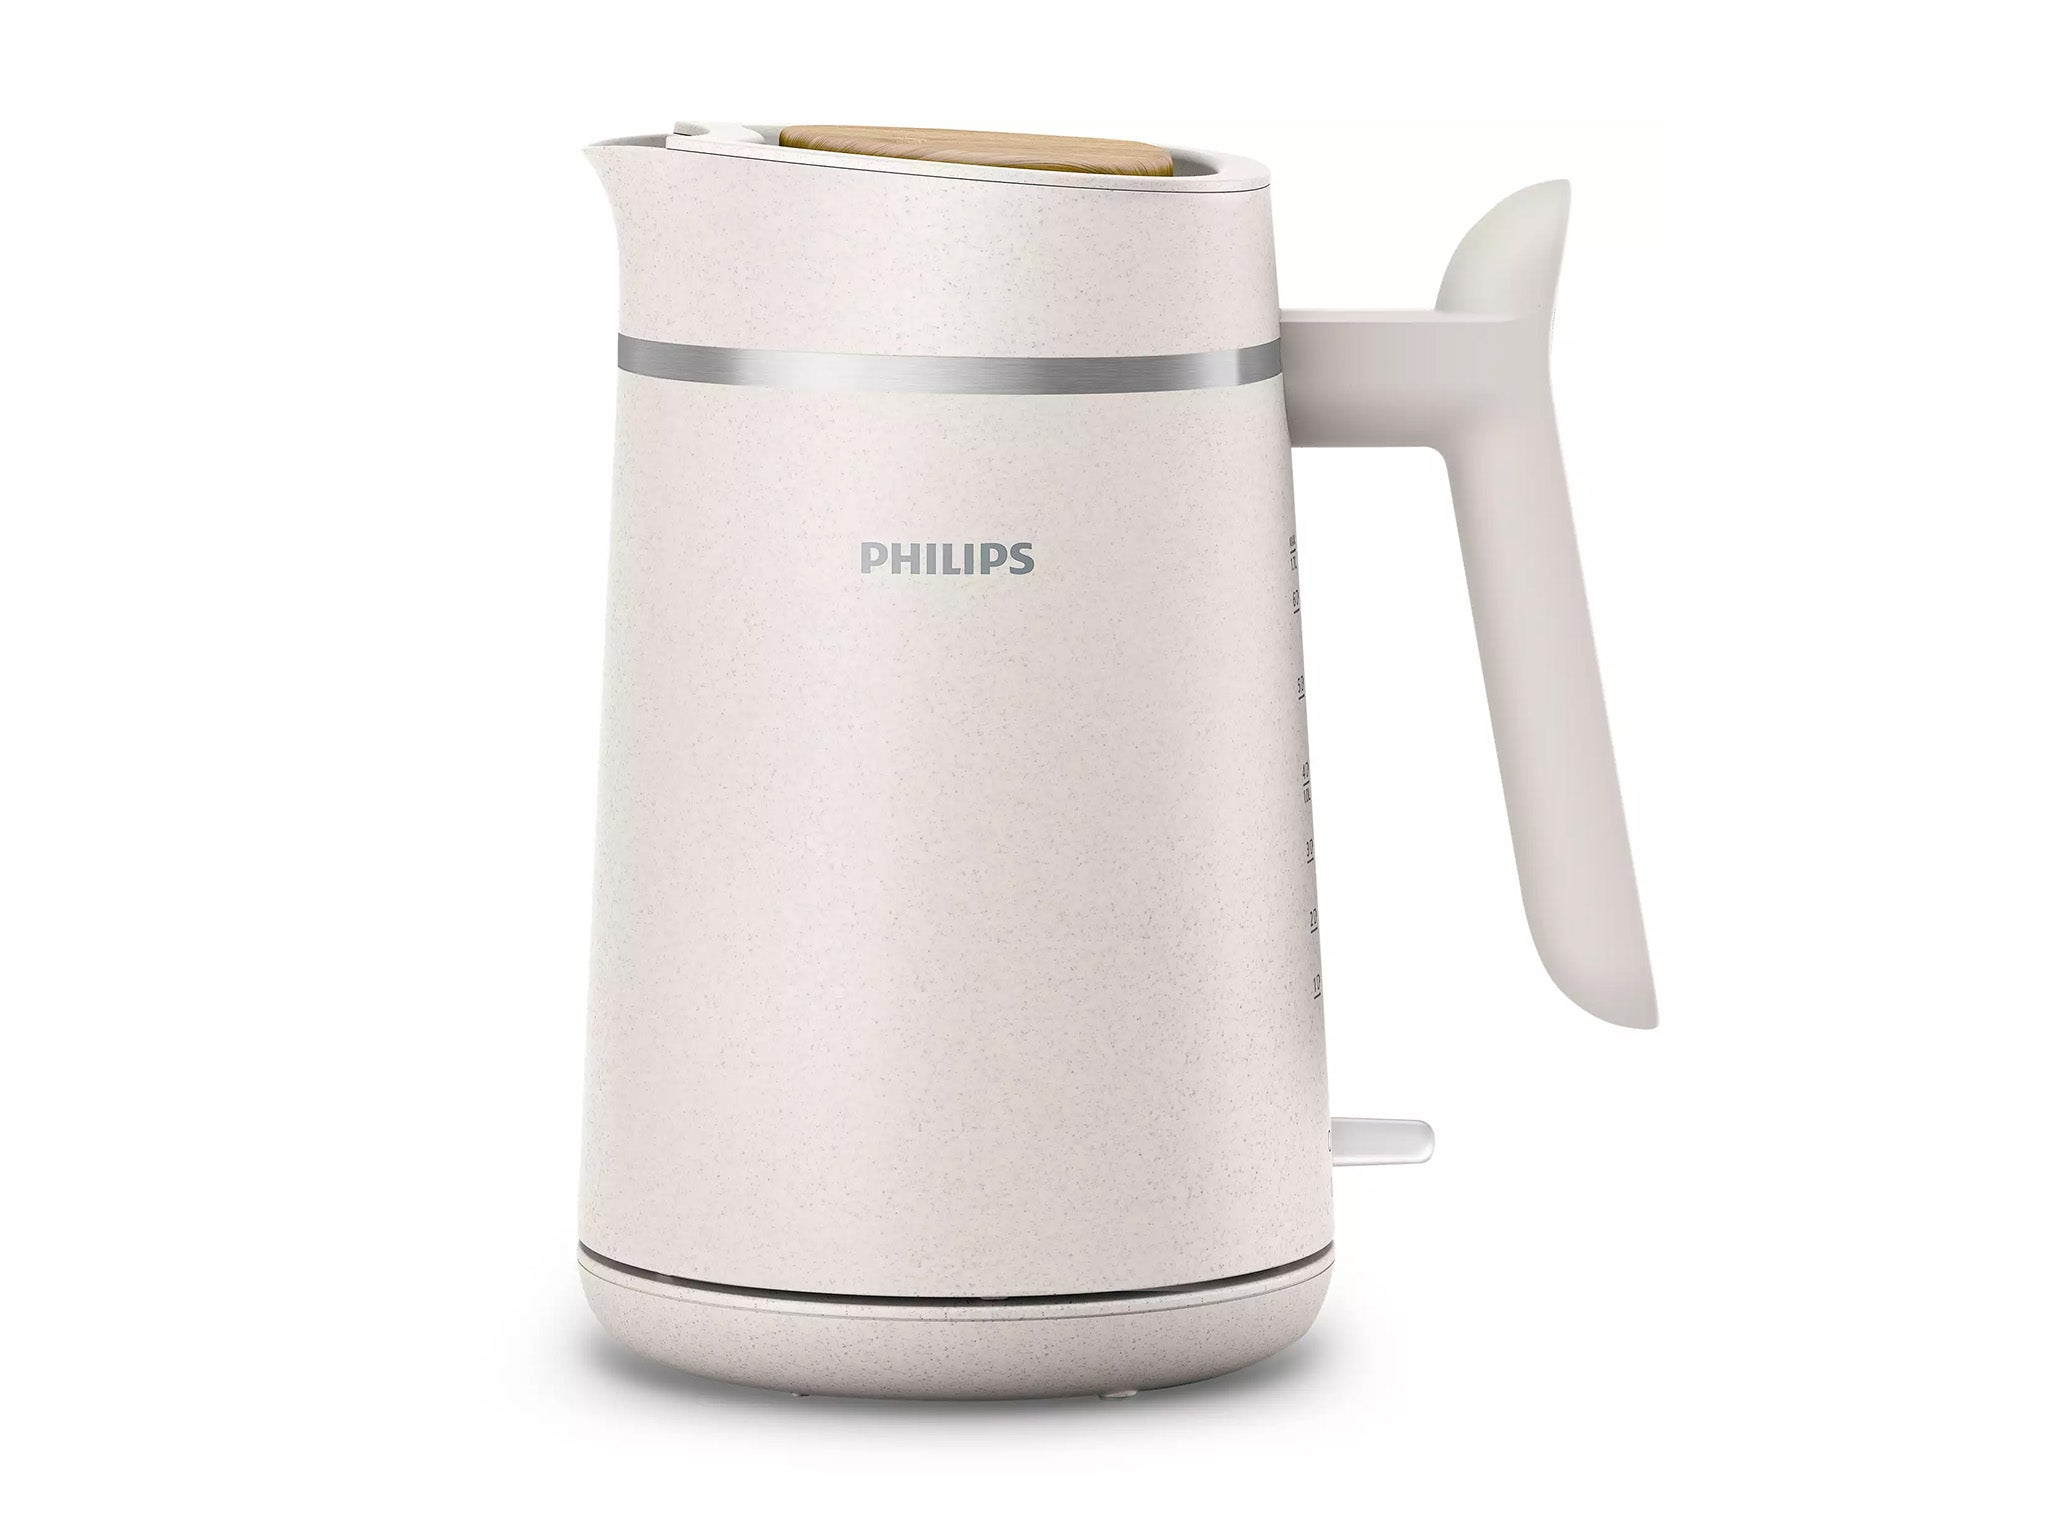 Philips eco conscious edition5000 series kettle